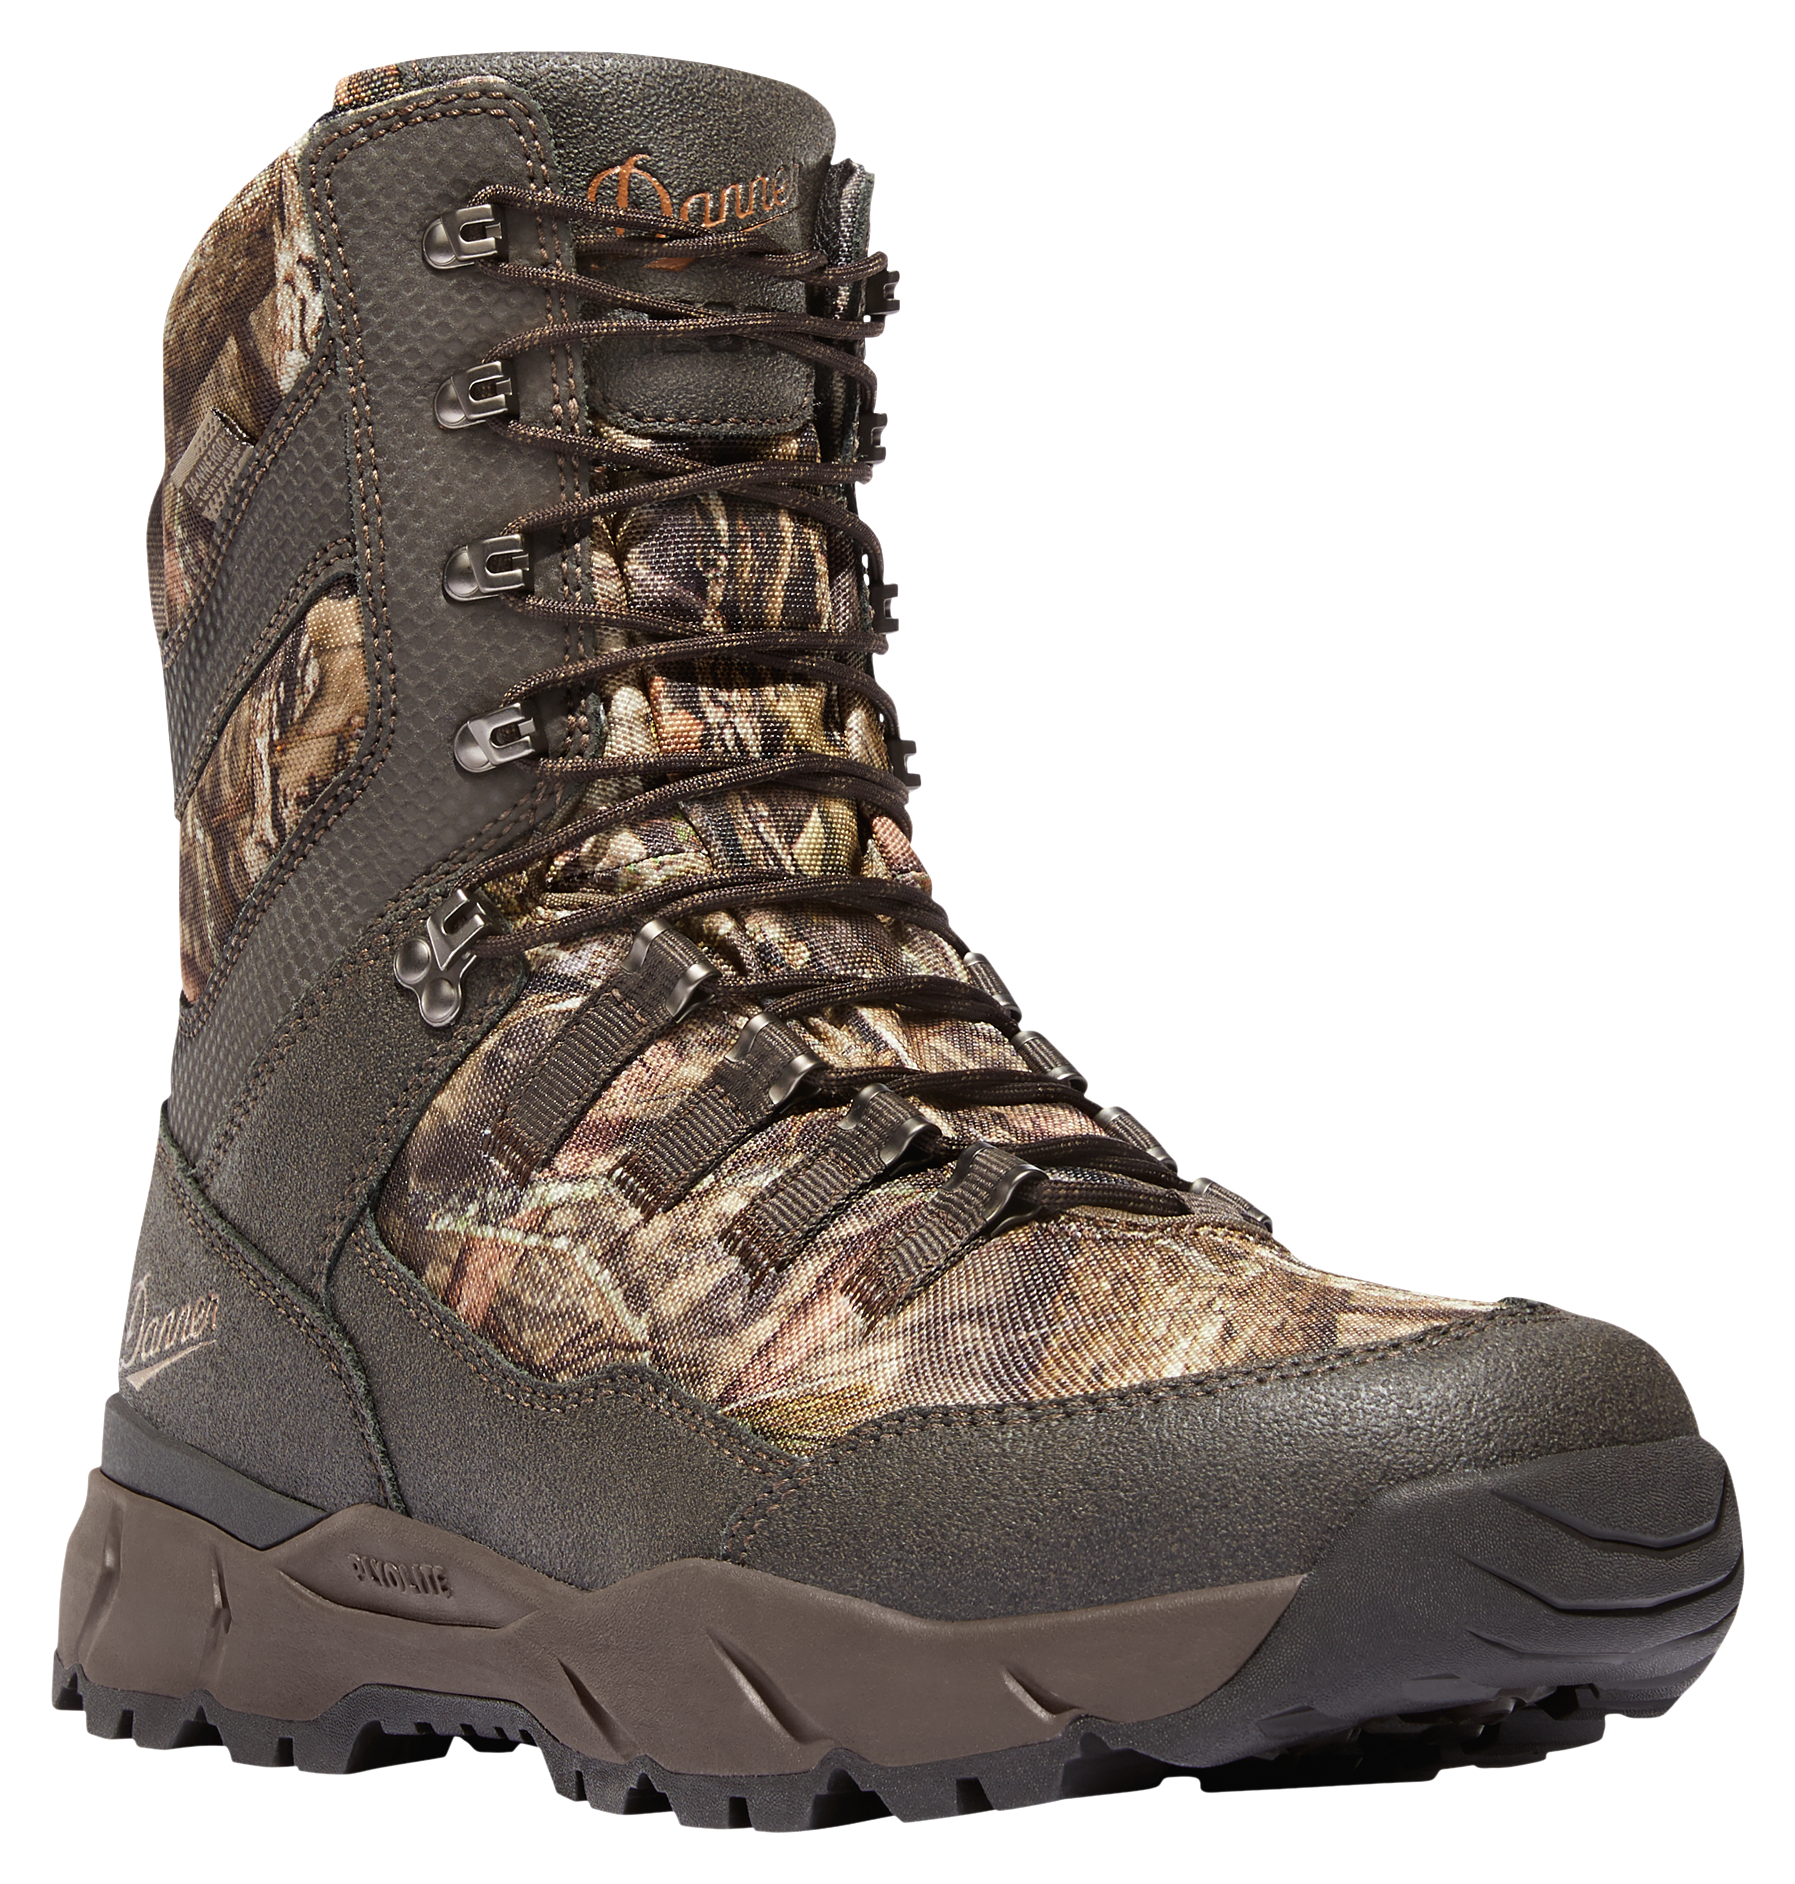 Danner Vital 1,200 Insulated Waterproof Hunting Boots for Men | Cabela's